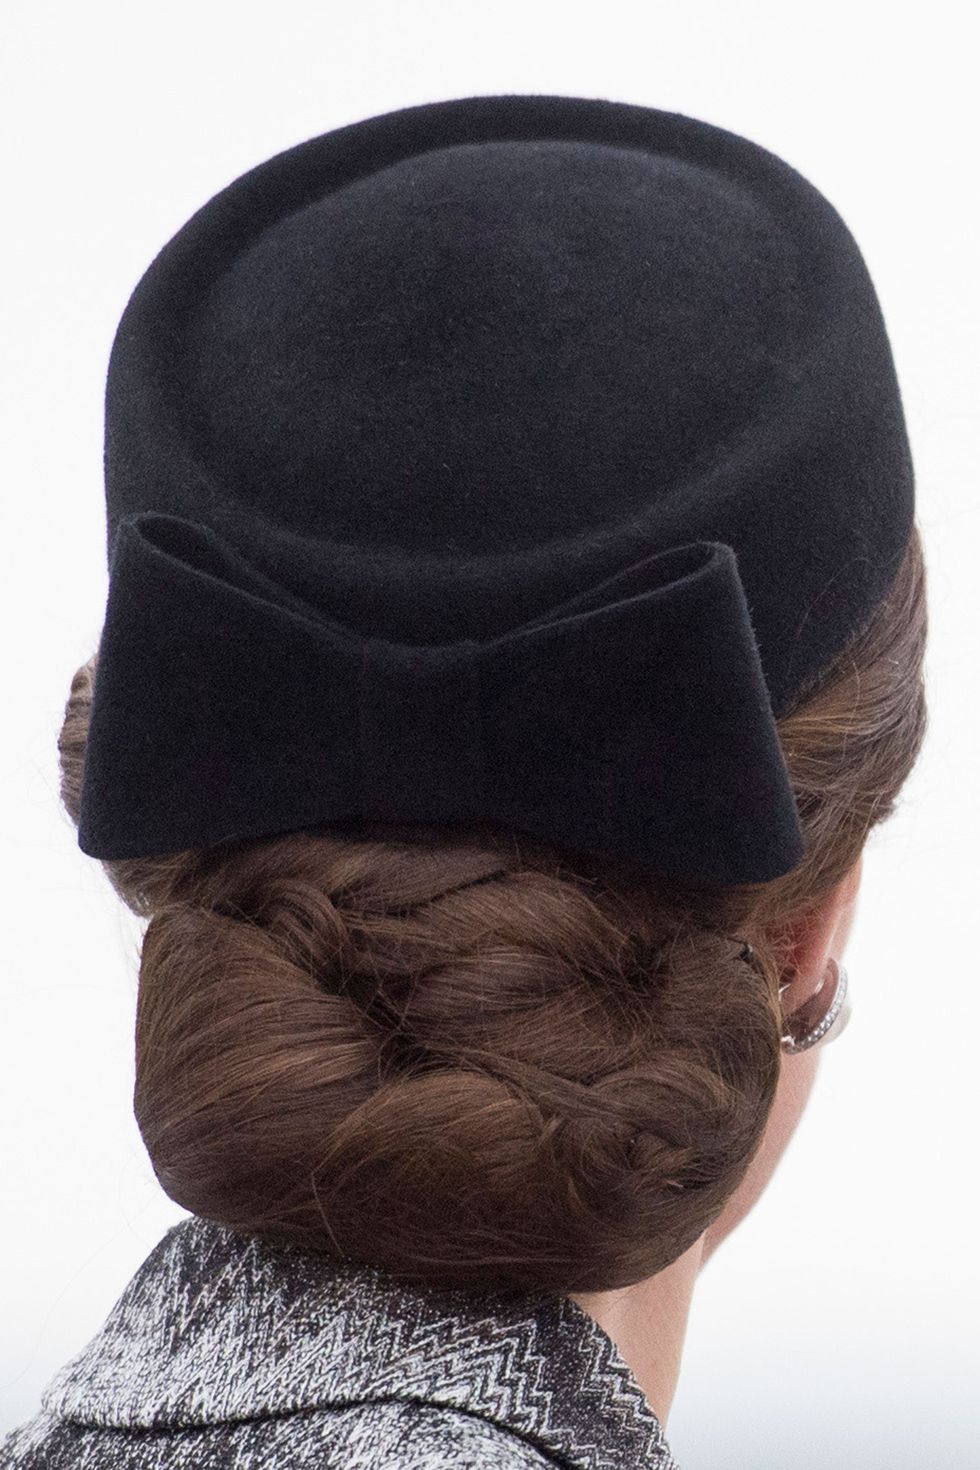 Hairstyle, Forehead, Cap, Headgear, Costume accessory, Temple, Wool, Wrinkle, Woolen, Hair accessory, 